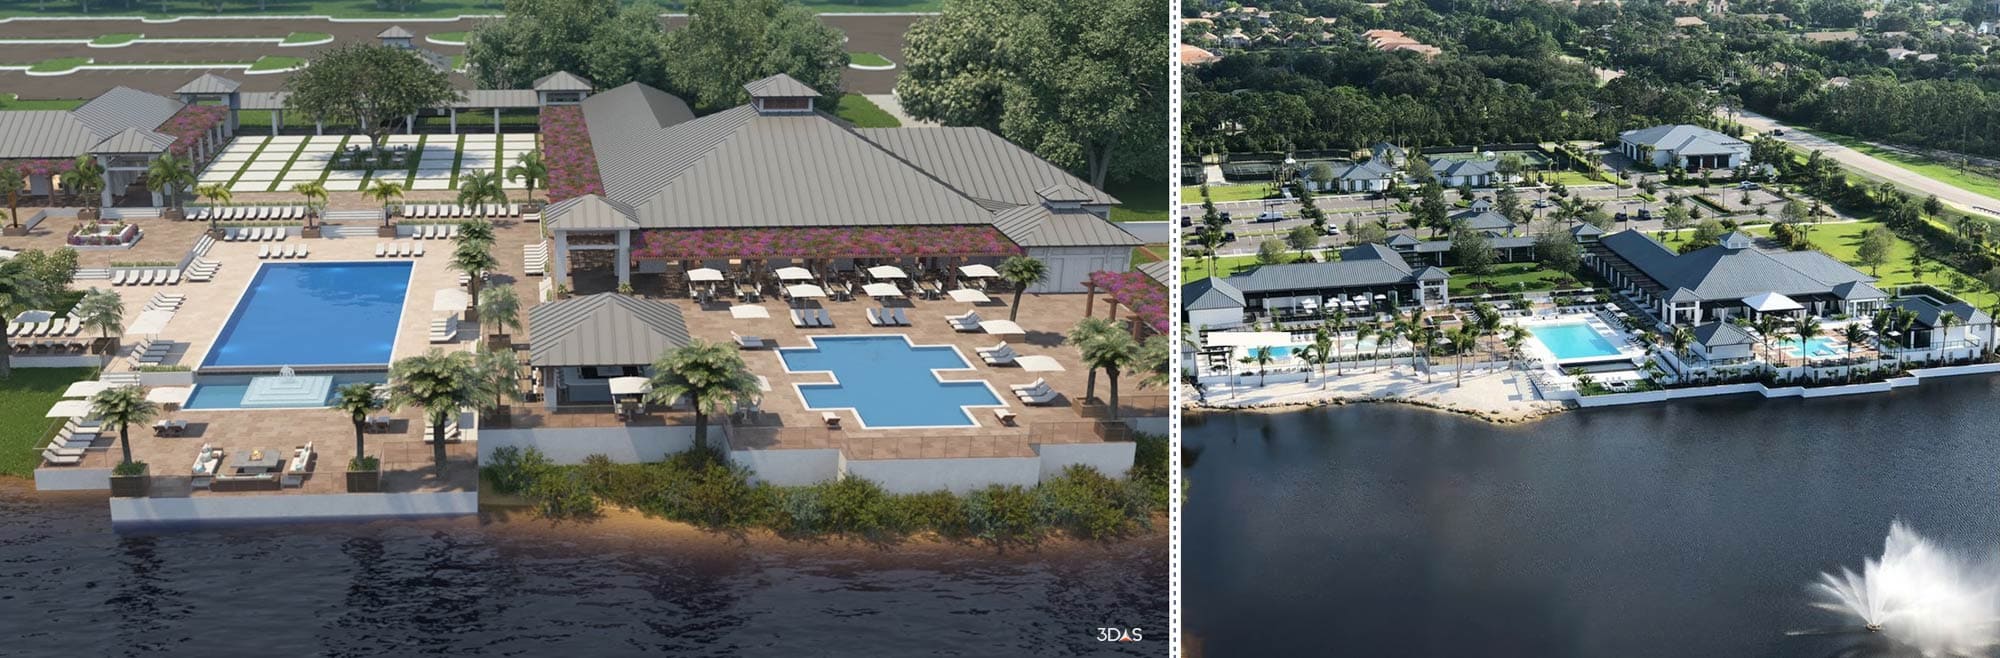 Kalea Bay Aerial Clubhouse 3D Rendering (Left) and Photo (Right)